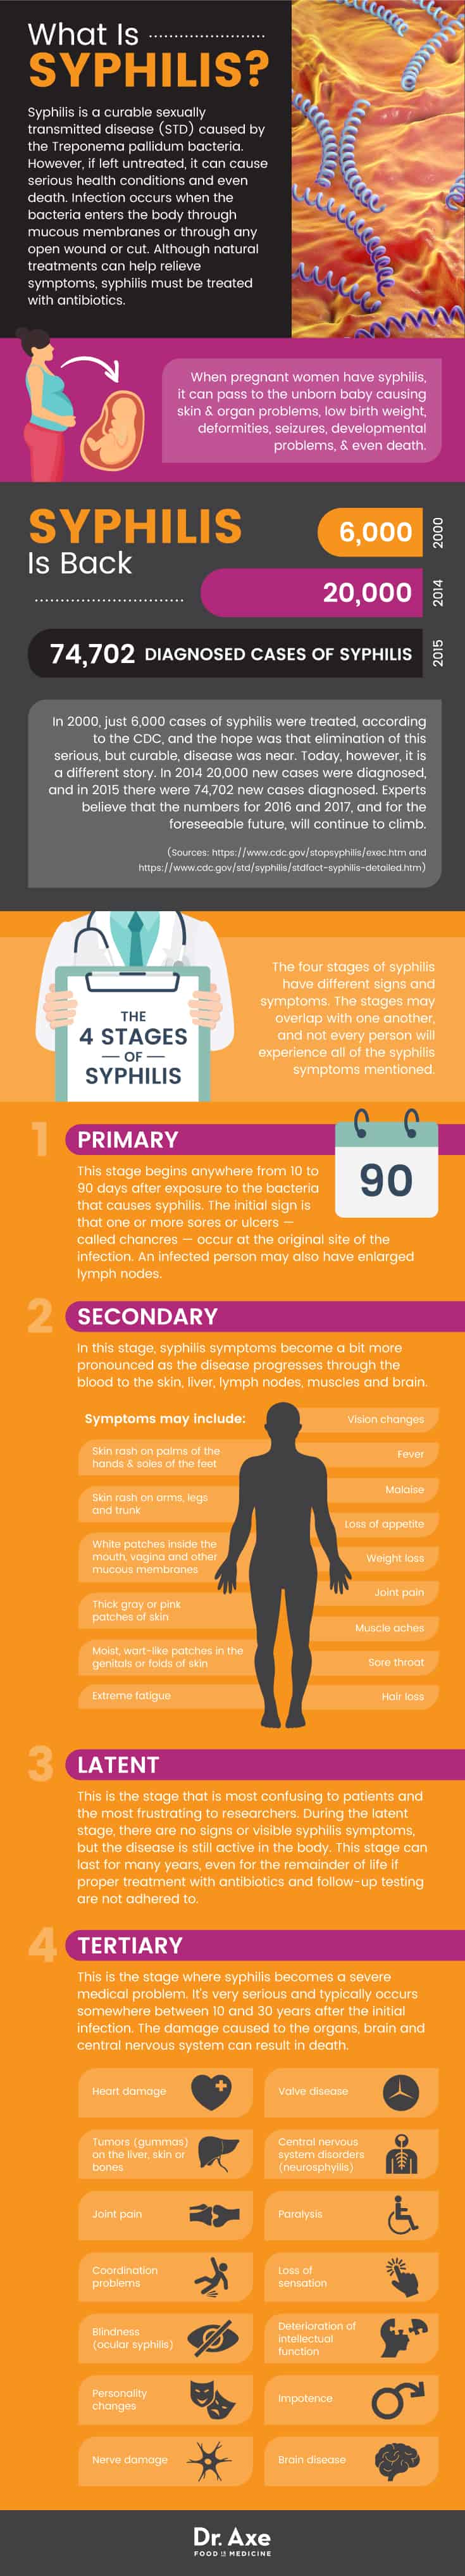 Syphilis symptoms: 4 stages of syphilis - Dr. Axe